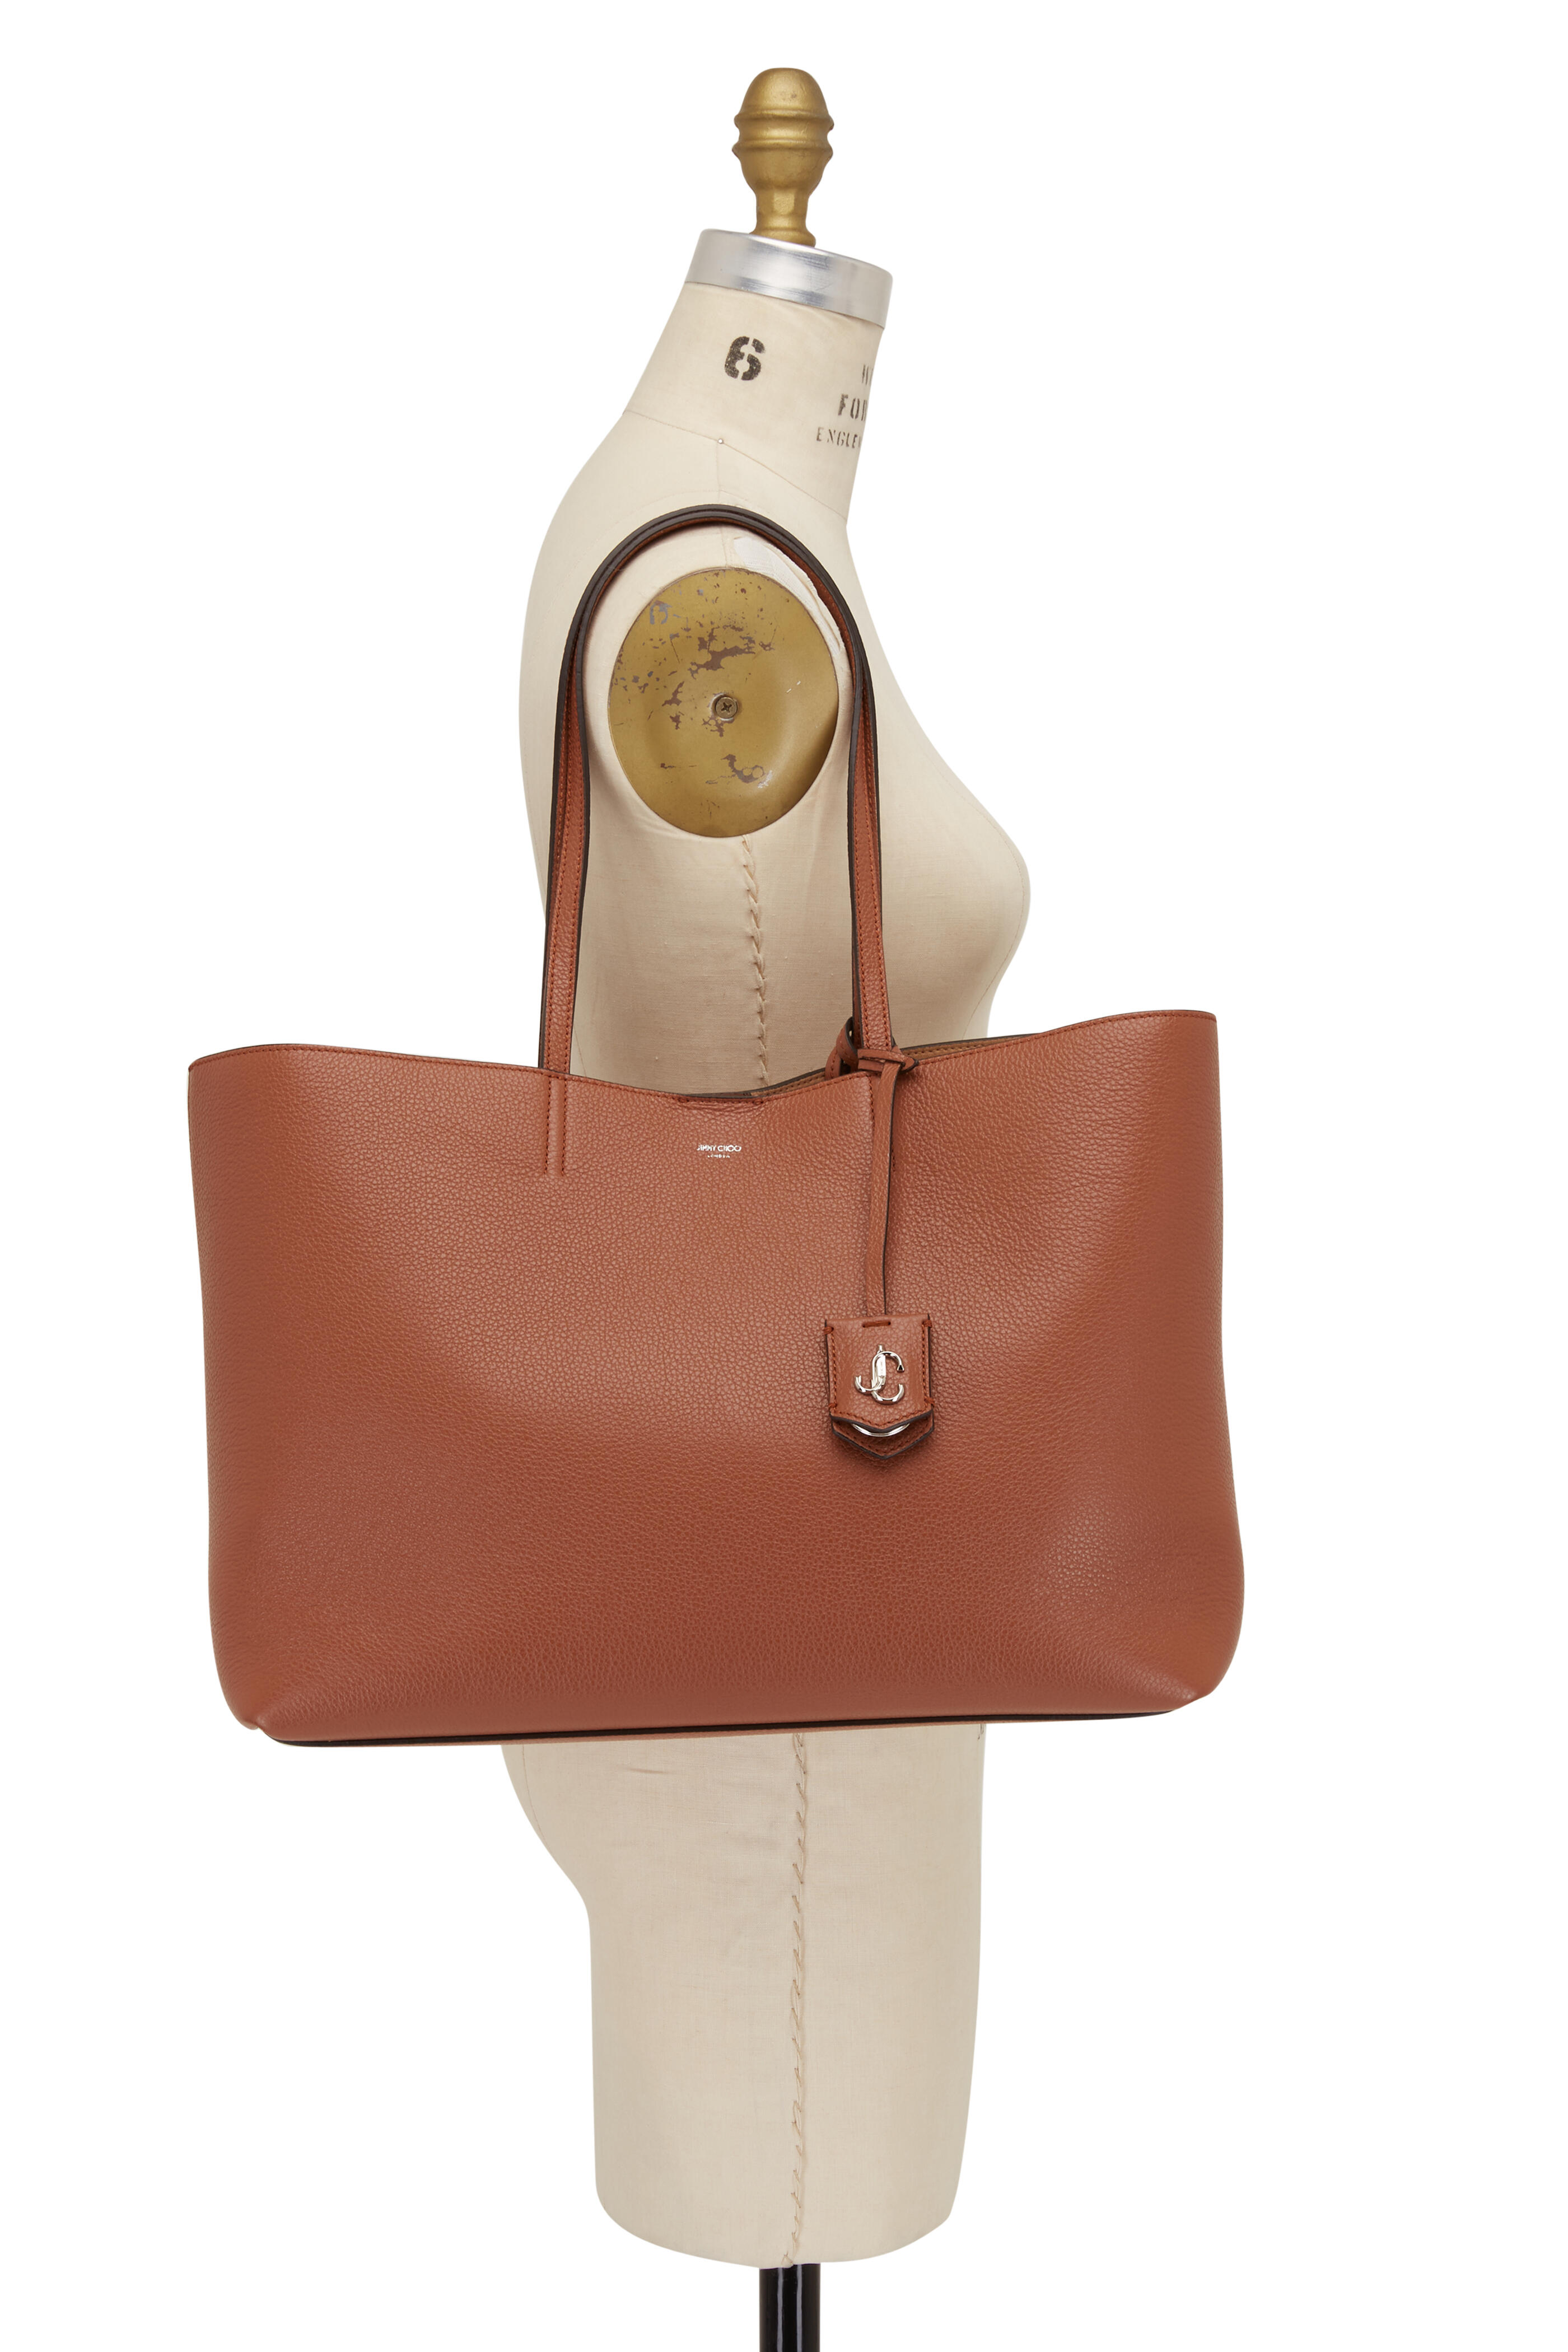 Buy XAFITI Brand New Leather Shoulder Tote Bag Online